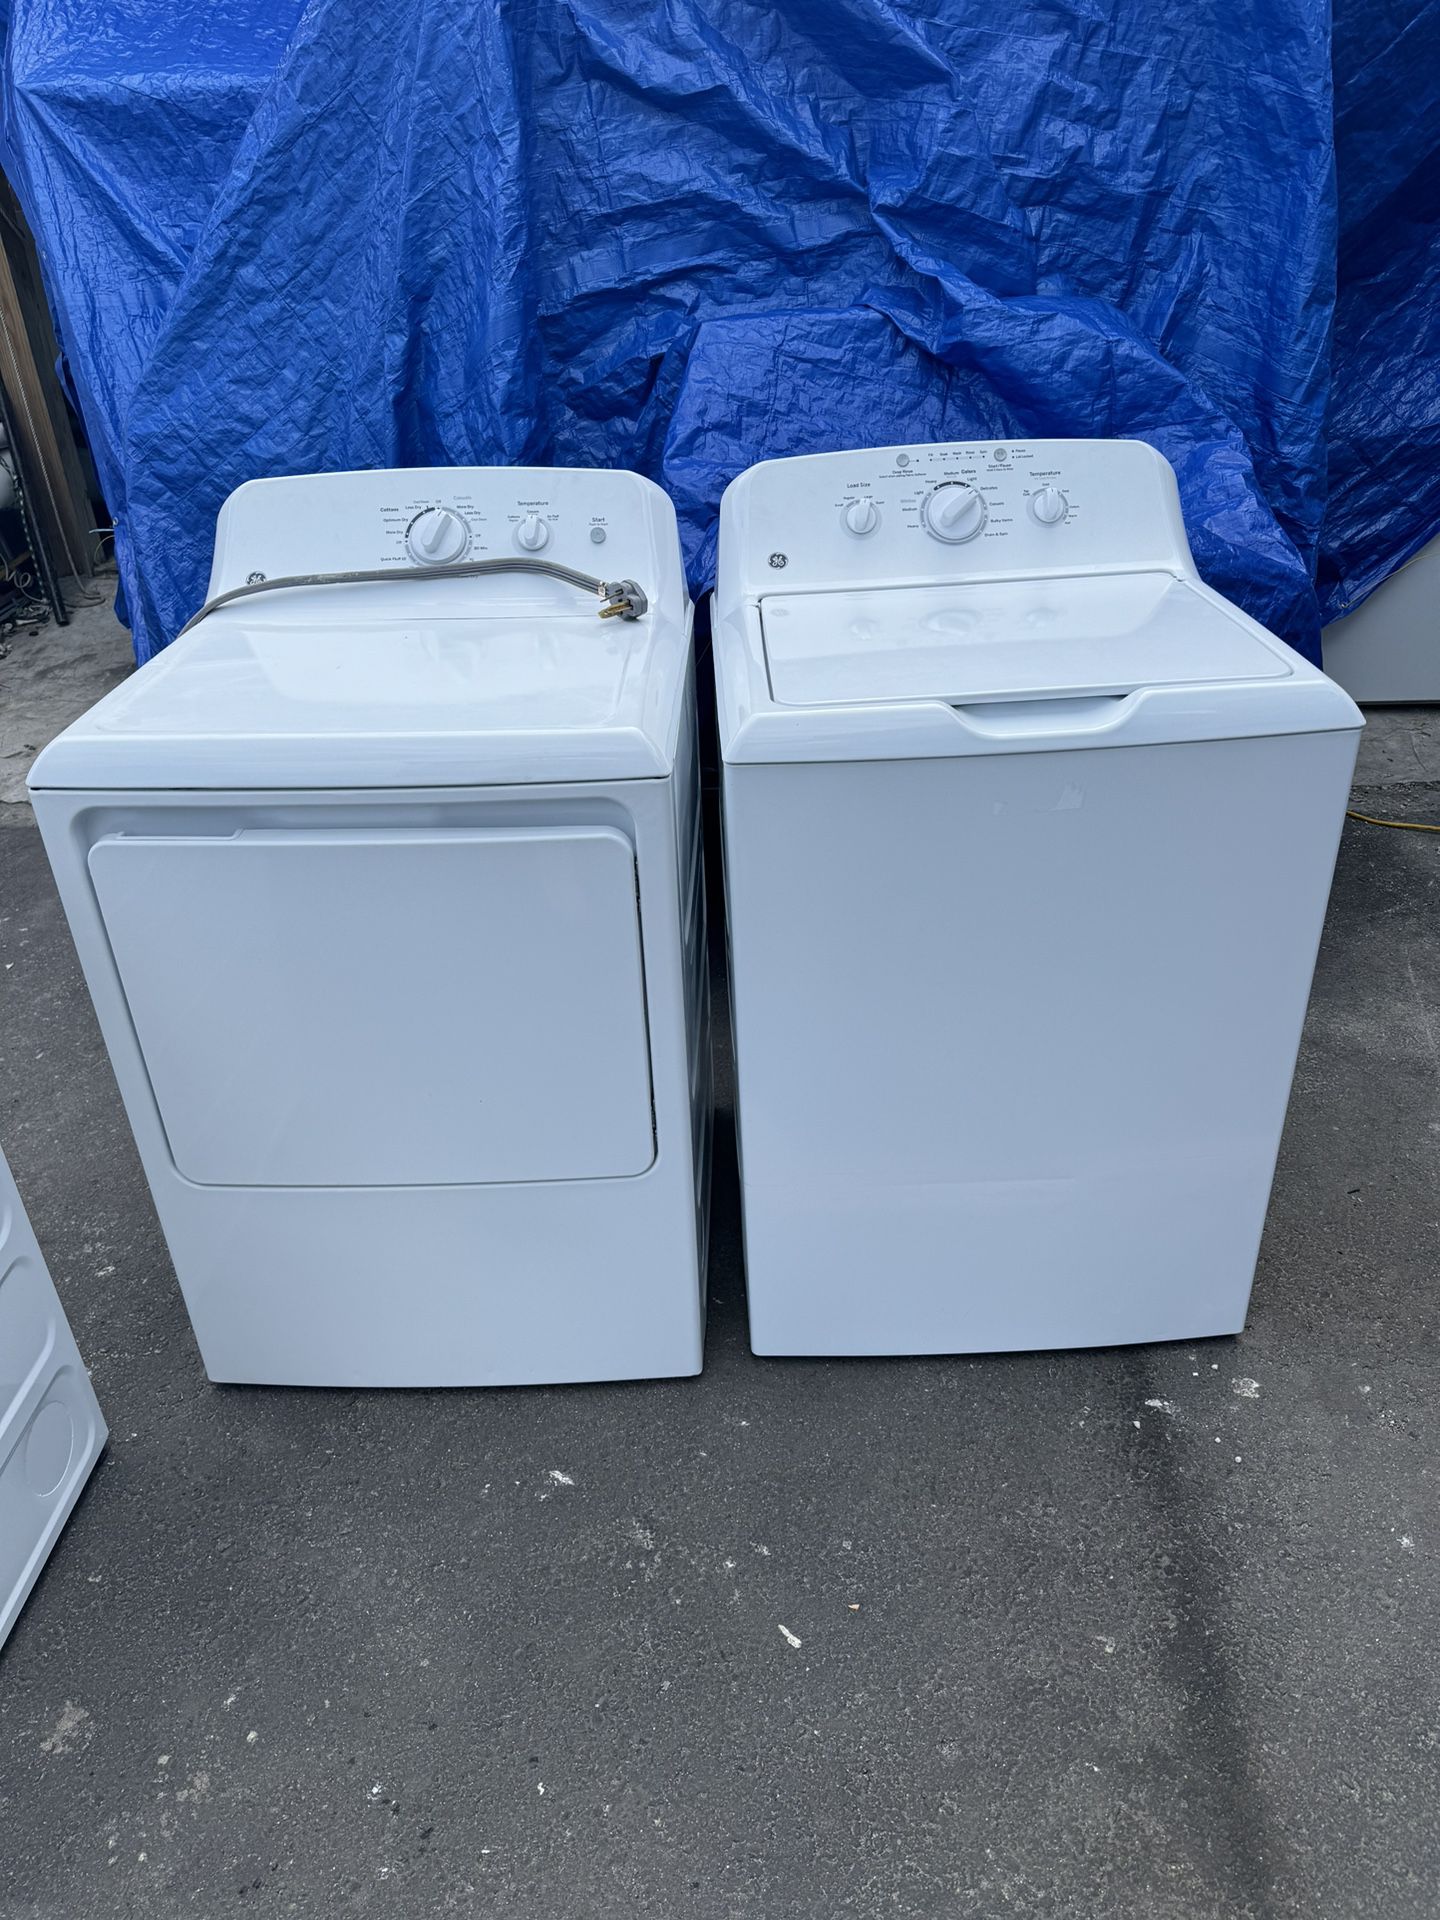 GE Washer And Electric Dryer Almost New One Receipt For 90 Days Warranty 